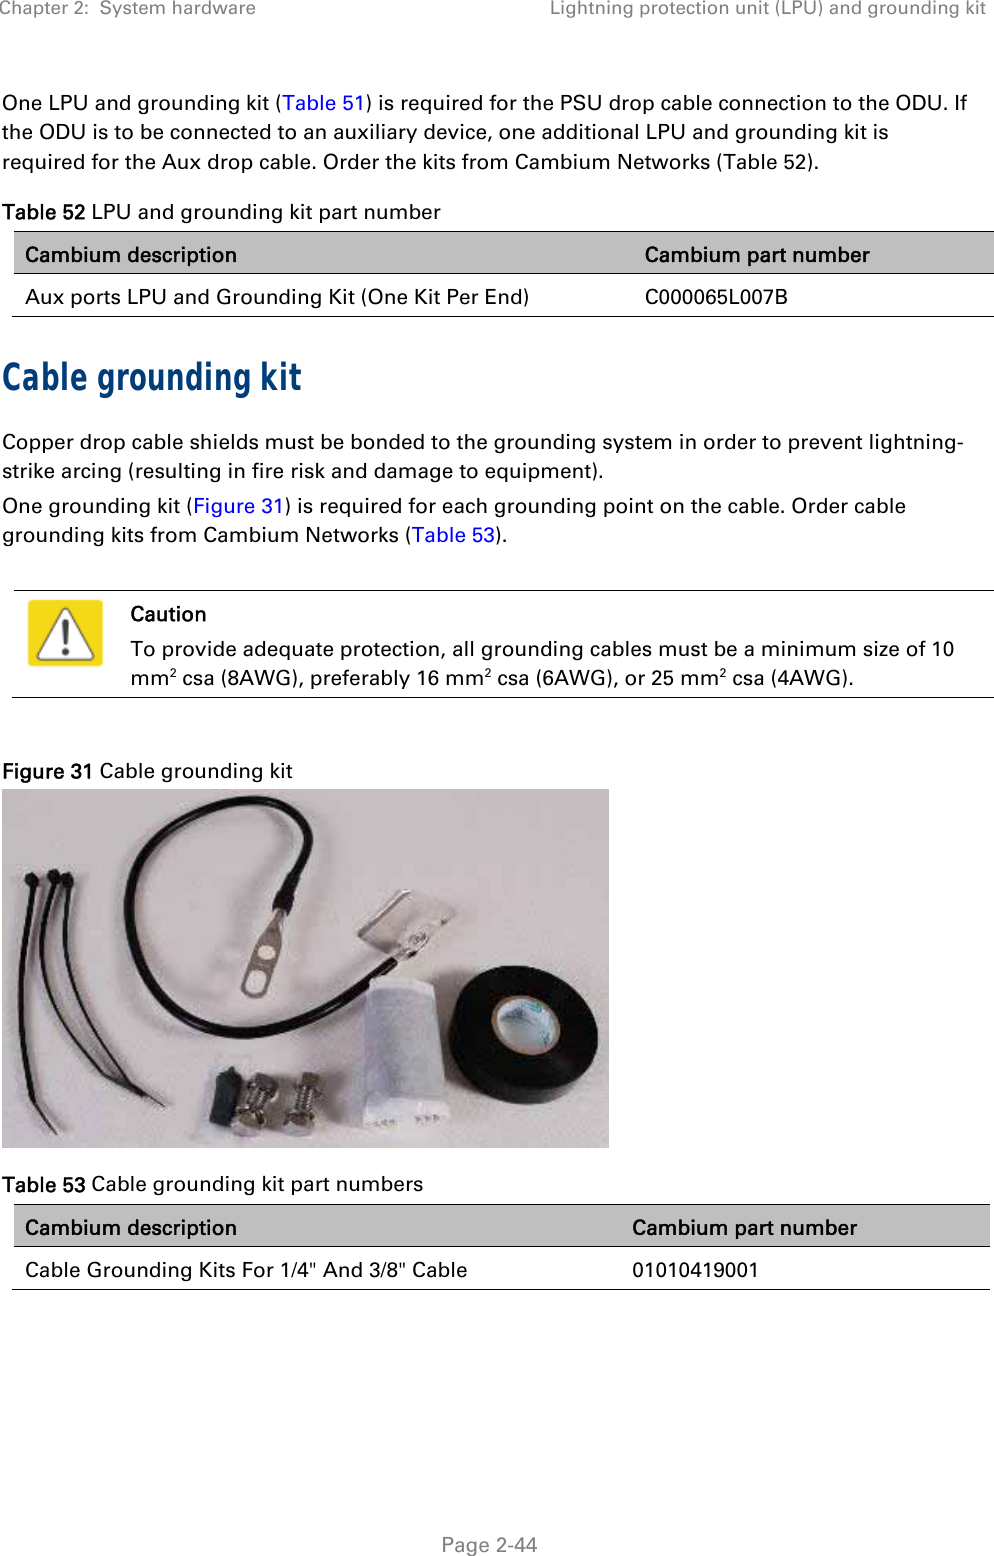 Chapter 2:  System hardware  Lightning protection unit (LPU) and grounding kit   Page 2-44 One LPU and grounding kit (Table 51) is required for the PSU drop cable connection to the ODU. If the ODU is to be connected to an auxiliary device, one additional LPU and grounding kit is required for the Aux drop cable. Order the kits from Cambium Networks (Table 52). Table 52 LPU and grounding kit part number Cambium description  Cambium part number Aux ports LPU and Grounding Kit (One Kit Per End)   C000065L007B Cable grounding kit Copper drop cable shields must be bonded to the grounding system in order to prevent lightning-strike arcing (resulting in fire risk and damage to equipment). One grounding kit (Figure 31) is required for each grounding point on the cable. Order cable grounding kits from Cambium Networks (Table 53).   Caution To provide adequate protection, all grounding cables must be a minimum size of 10 mm2 csa (8AWG), preferably 16 mm2 csa (6AWG), or 25 mm2 csa (4AWG).  Figure 31 Cable grounding kit  Table 53 Cable grounding kit part numbers Cambium description  Cambium part number Cable Grounding Kits For 1/4&quot; And 3/8&quot; Cable  01010419001  